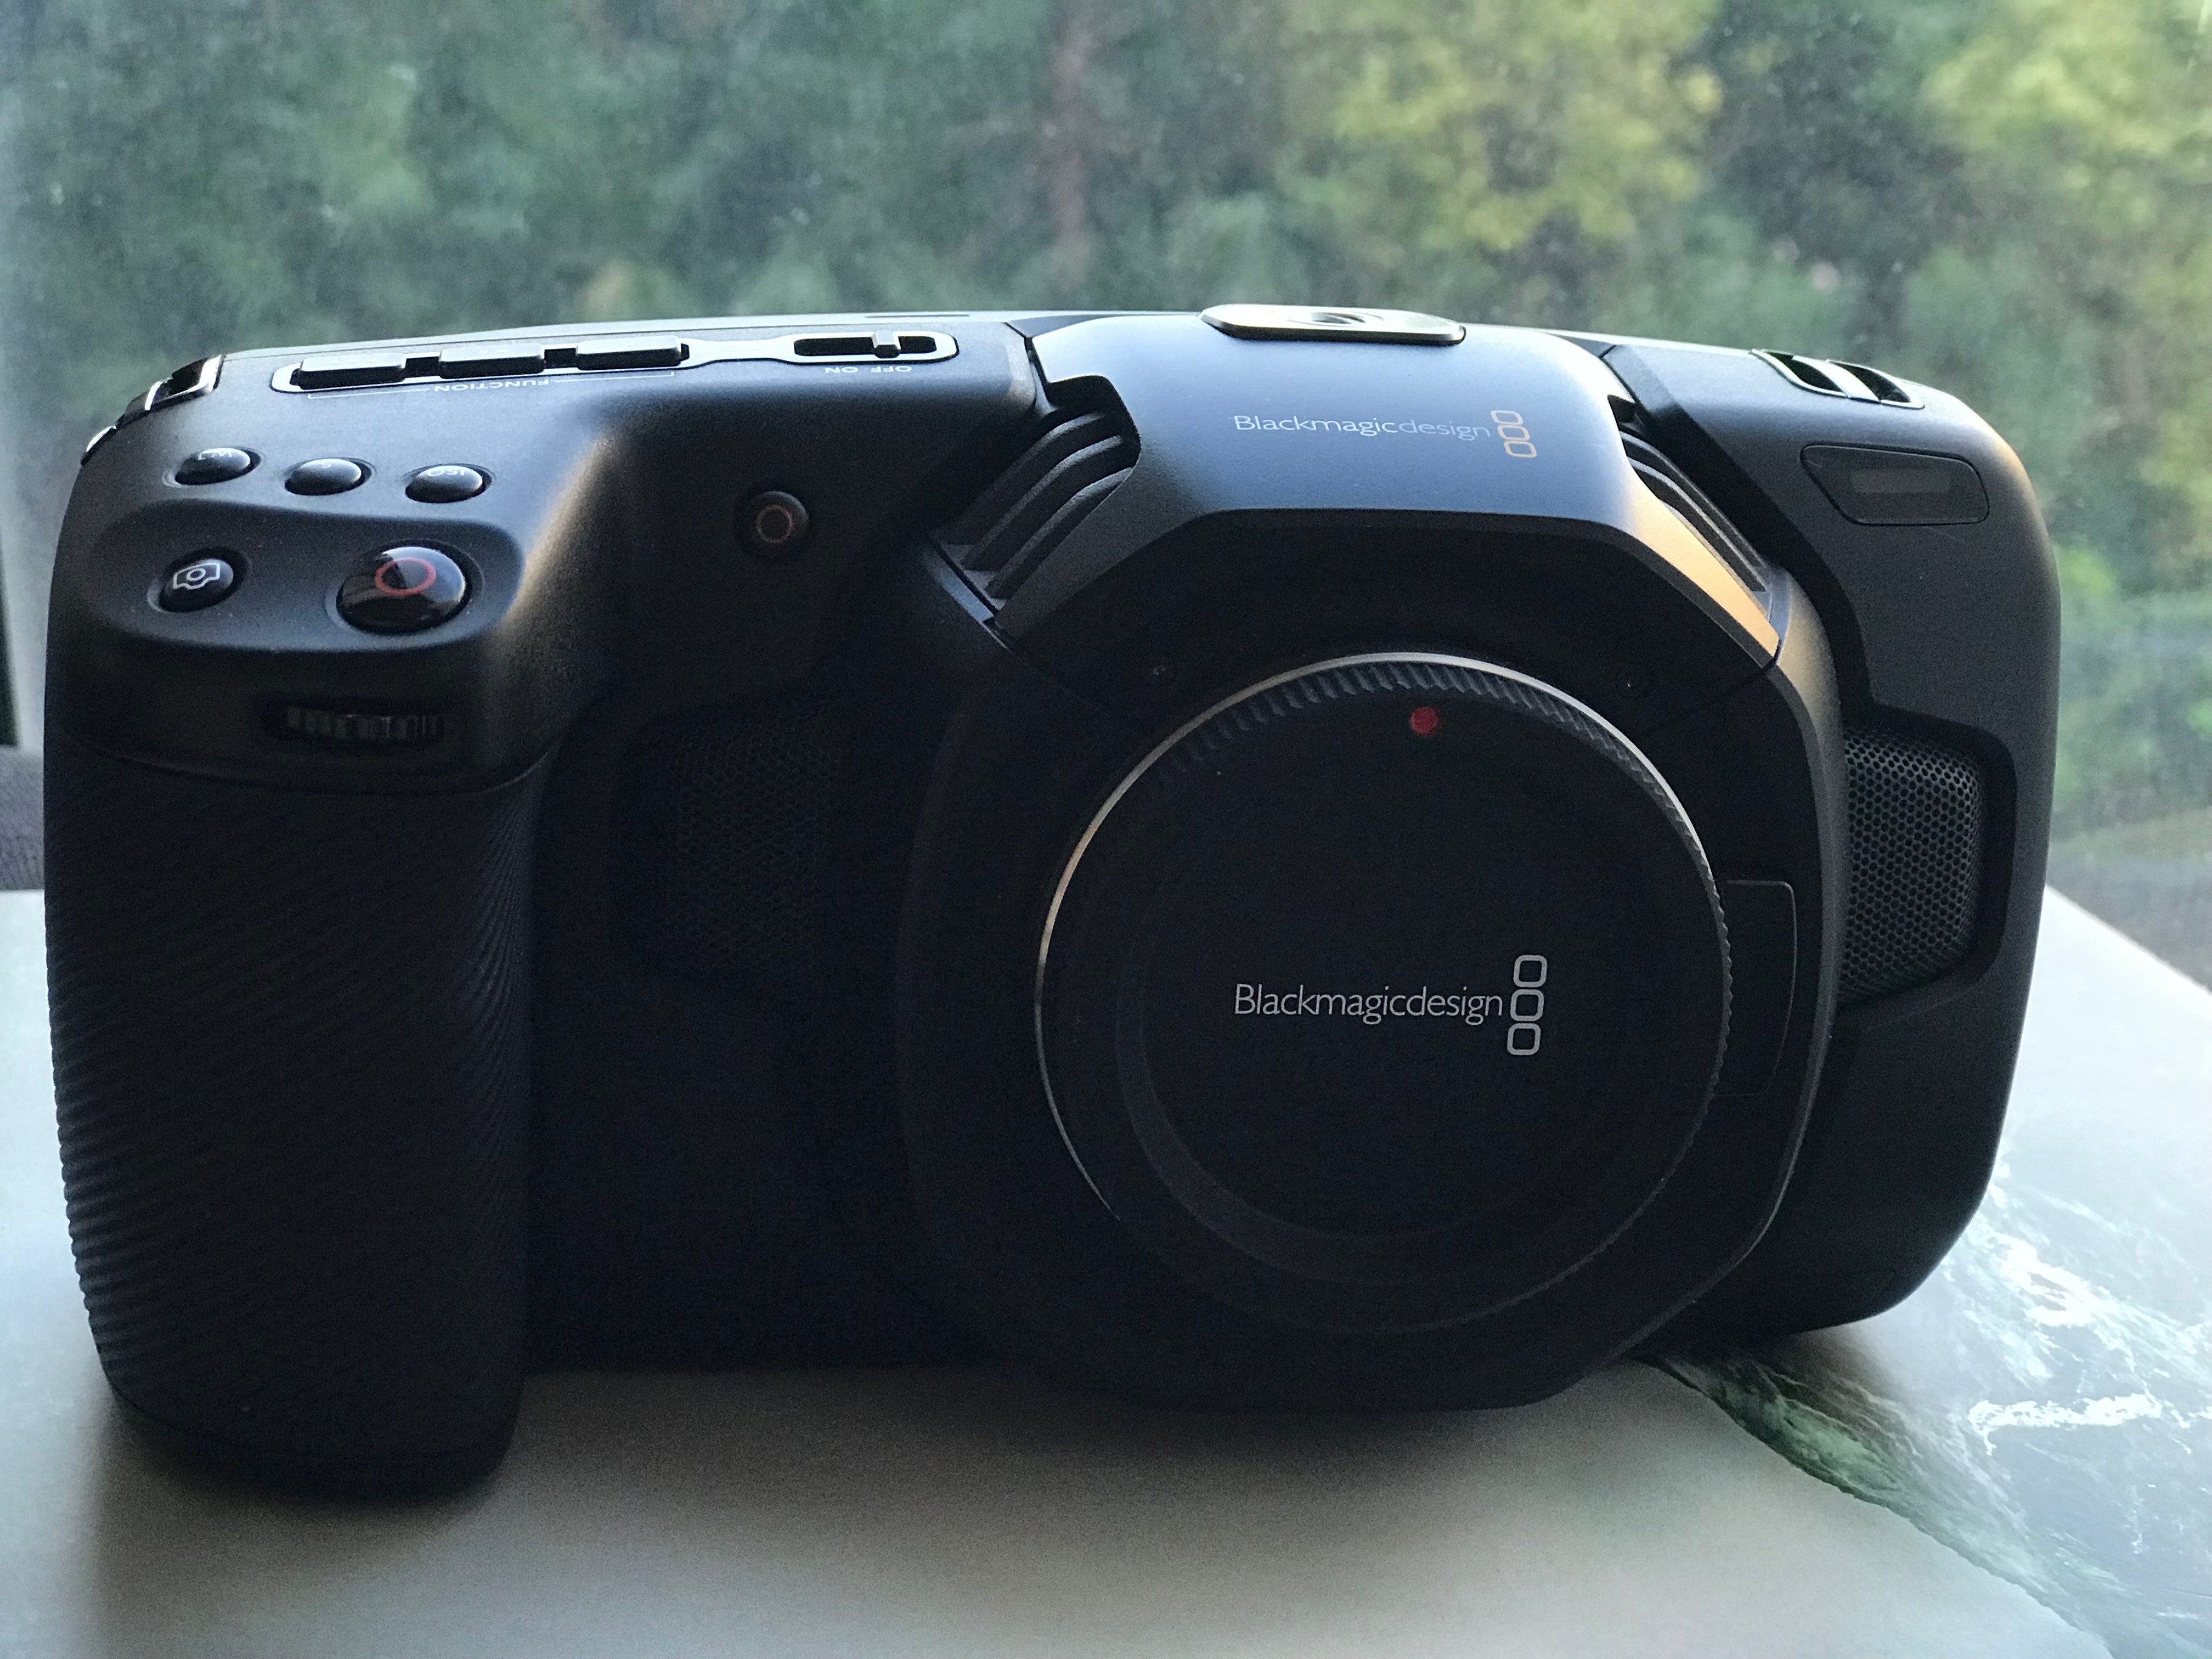 The Blackmagic Pocket Cinema Camera 4K is a great-value offering for video makers working to a tight budget, although users may miss having an autofocus function. Photos: Derek Ting